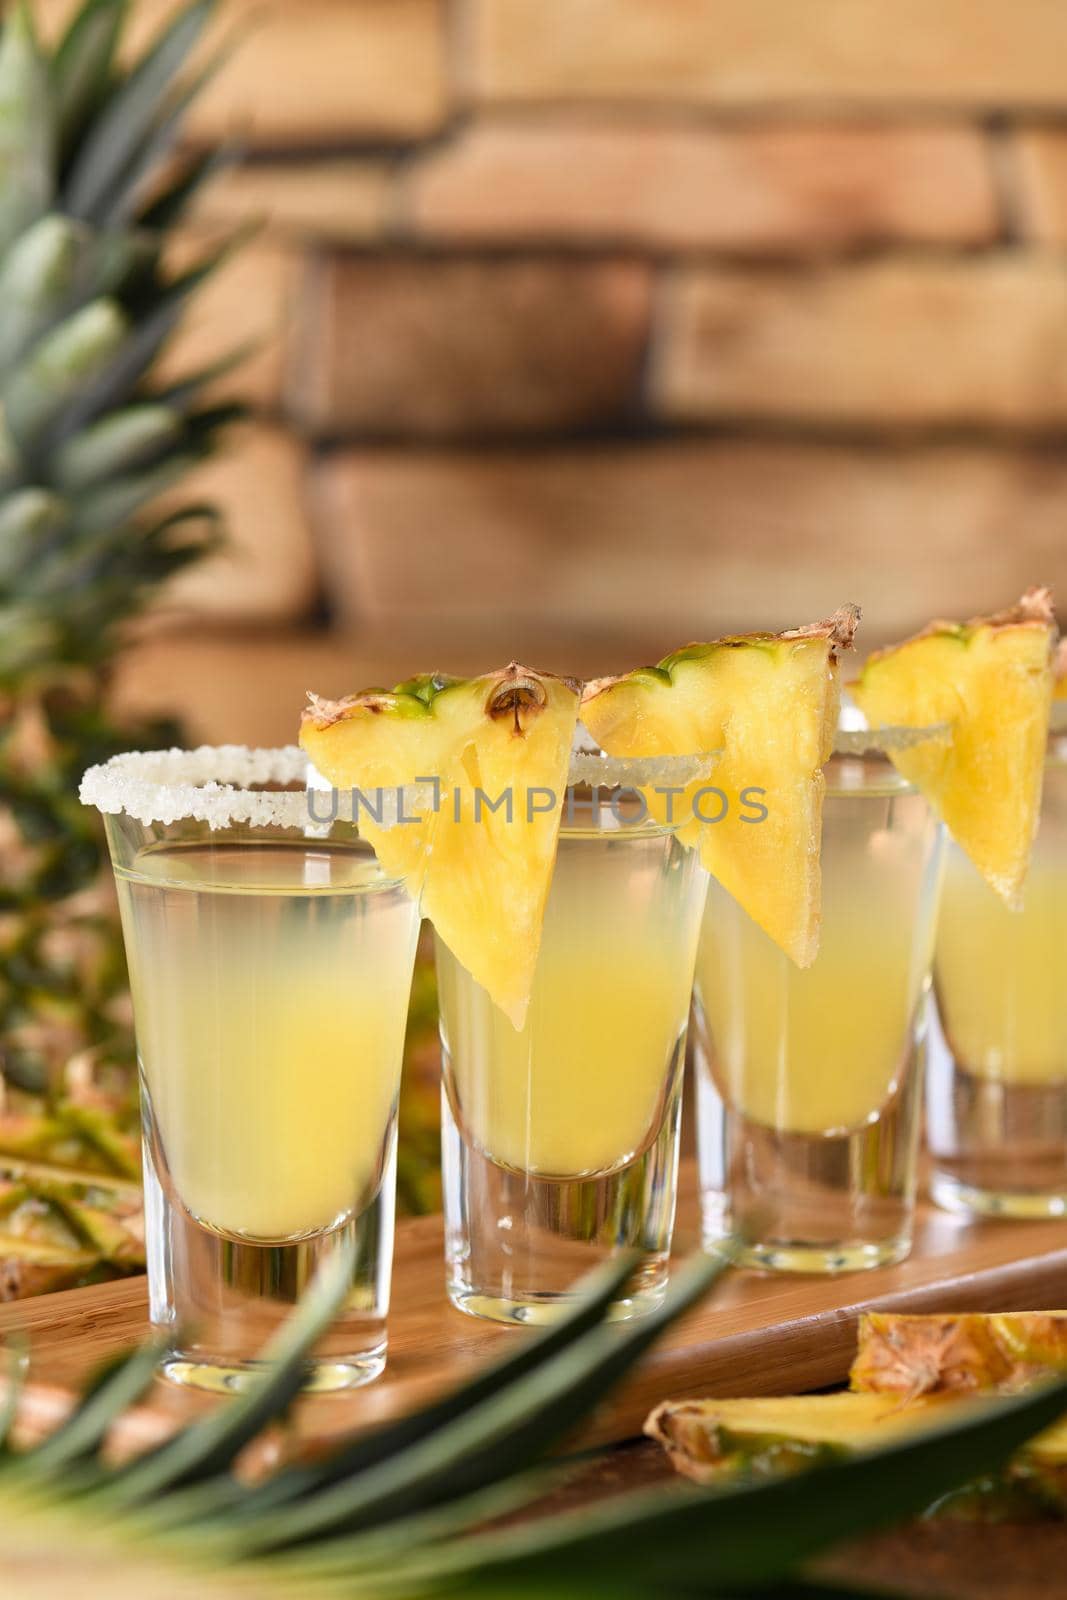 Tropical tequila shots by Apolonia